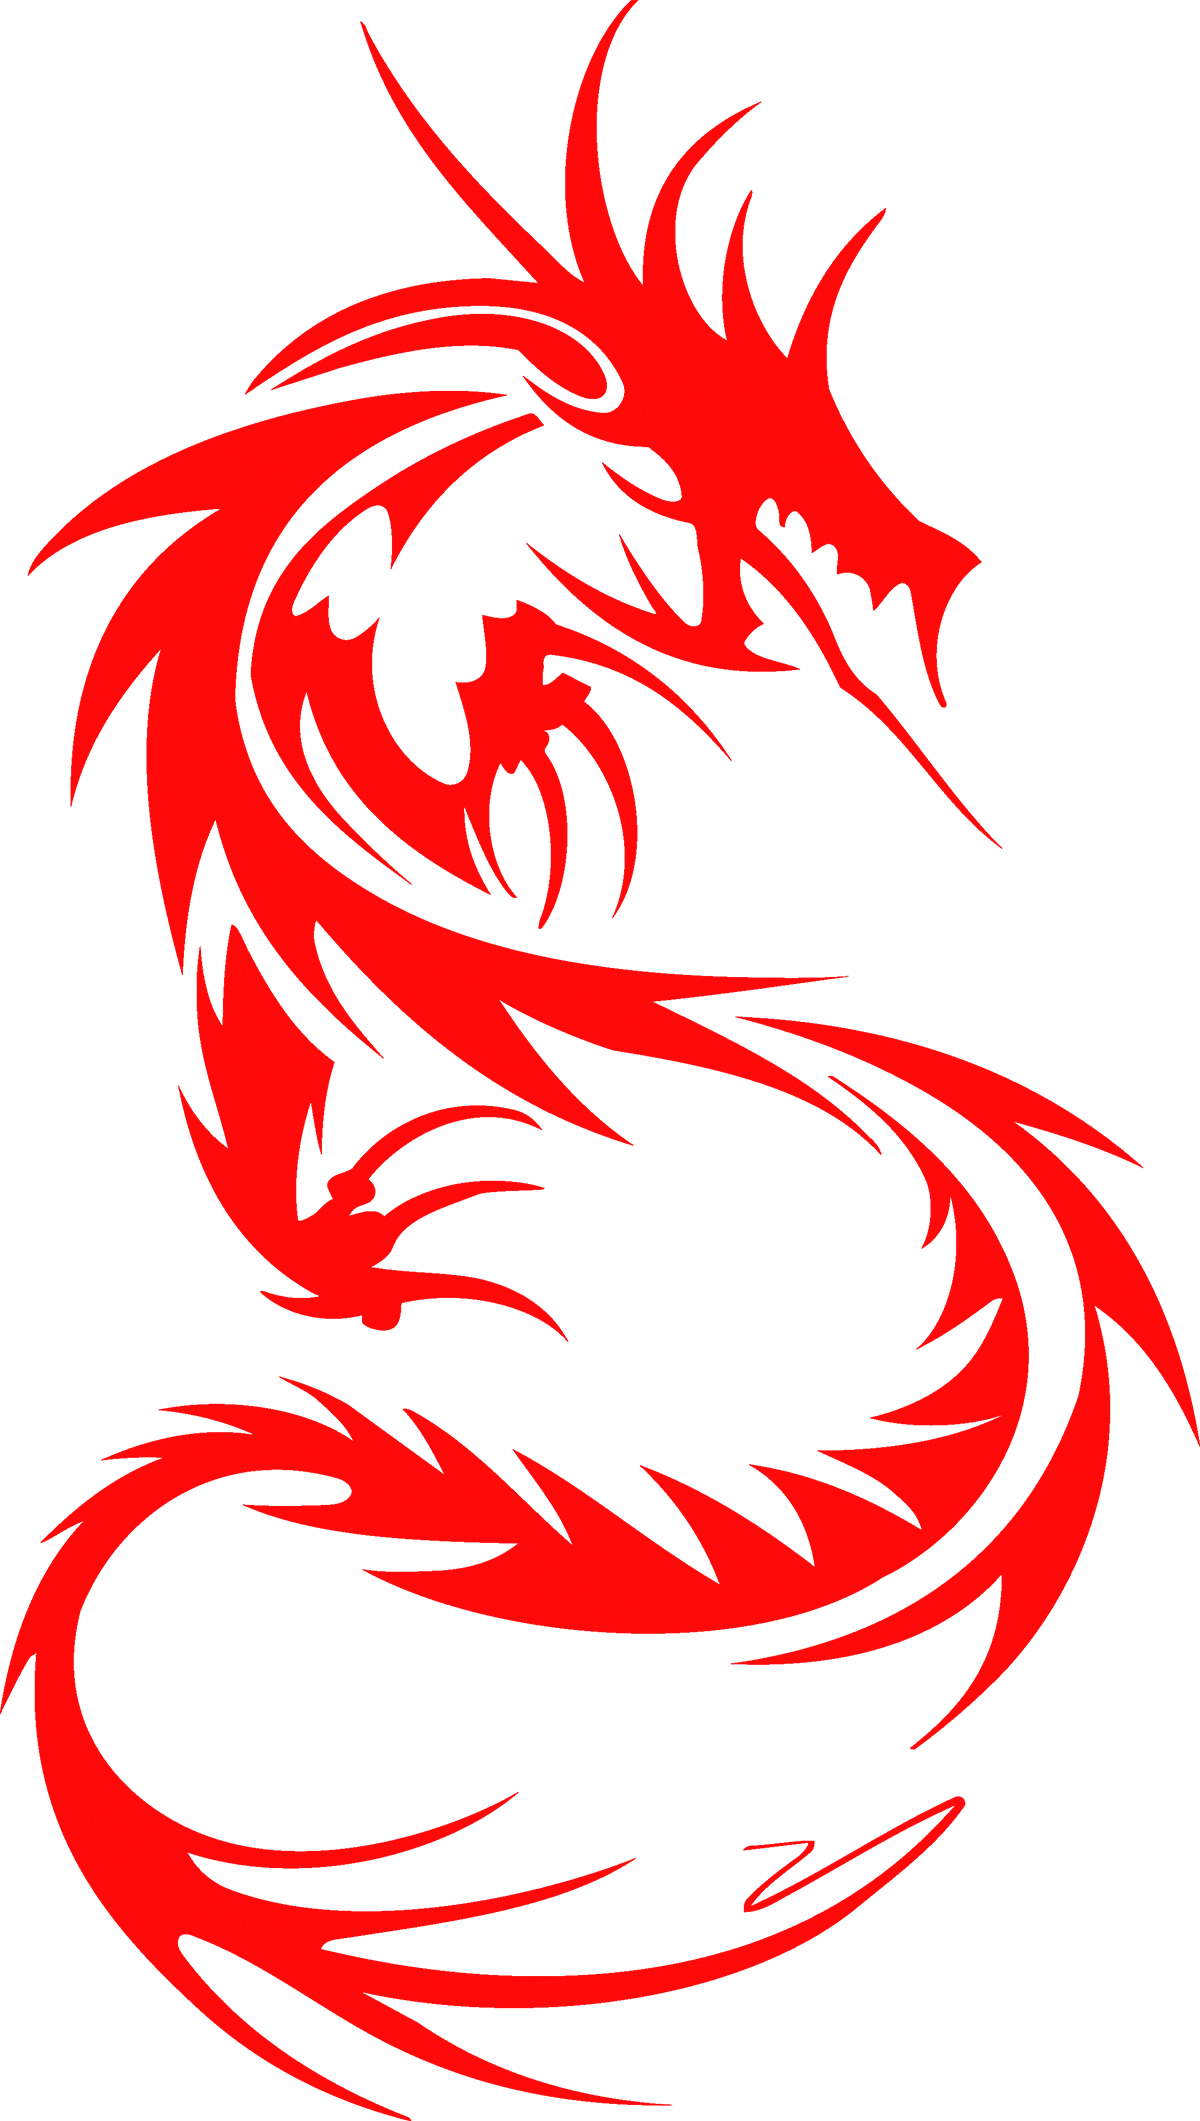 Paper-Cut Tattoo Sleeve Chinese Dragon Cover-Up Clipart